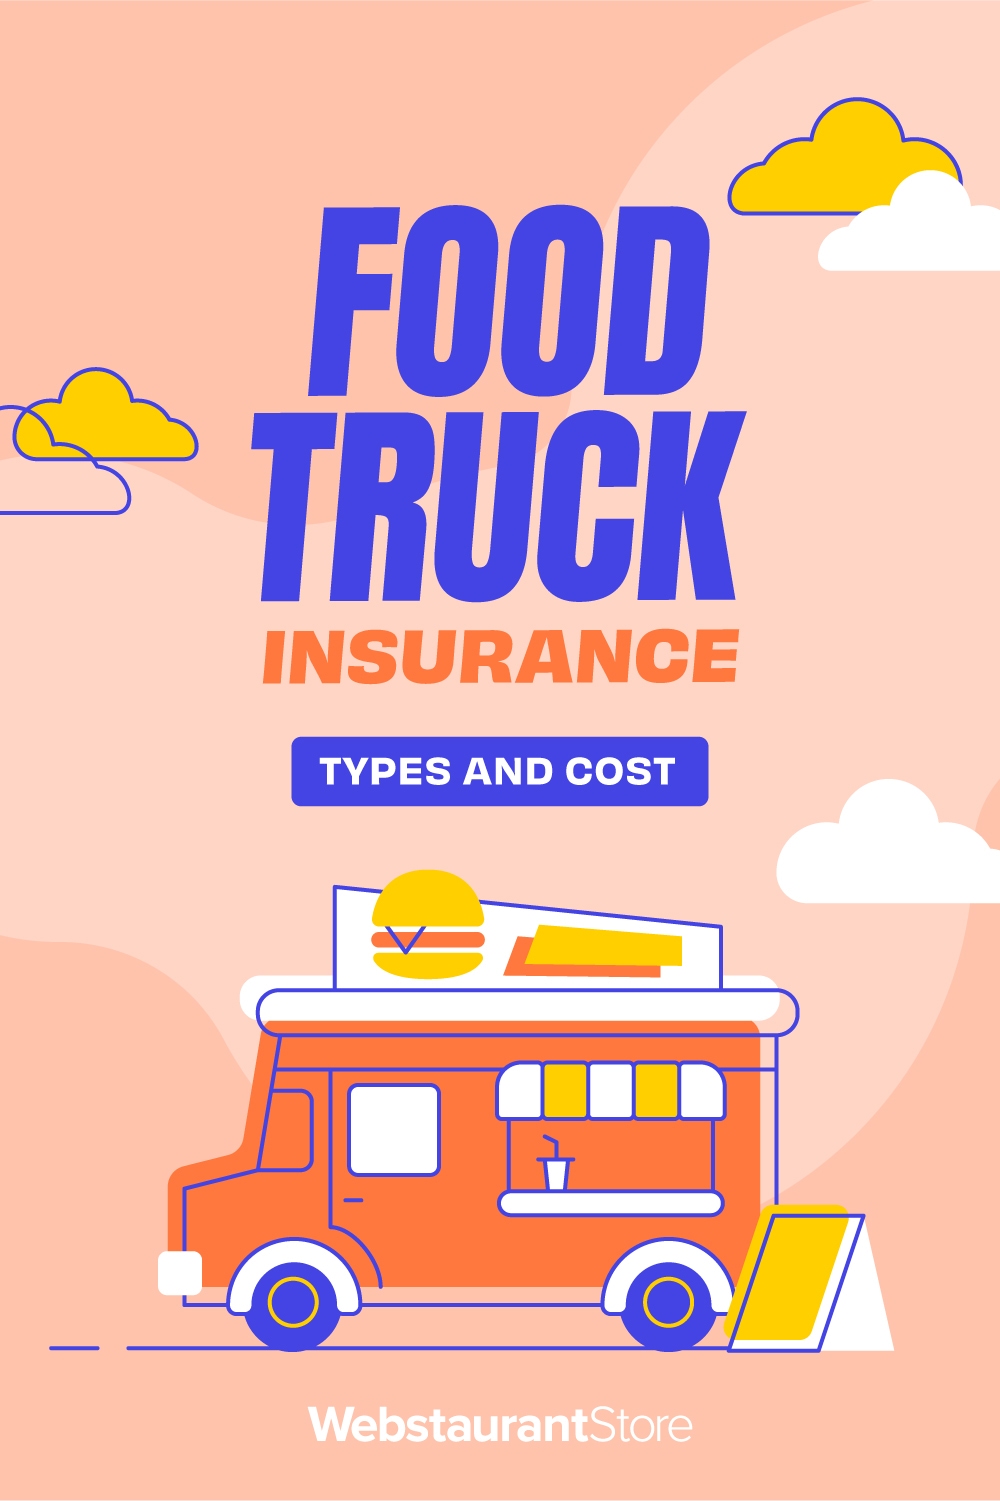 Food Truck Insurance Types and Costs